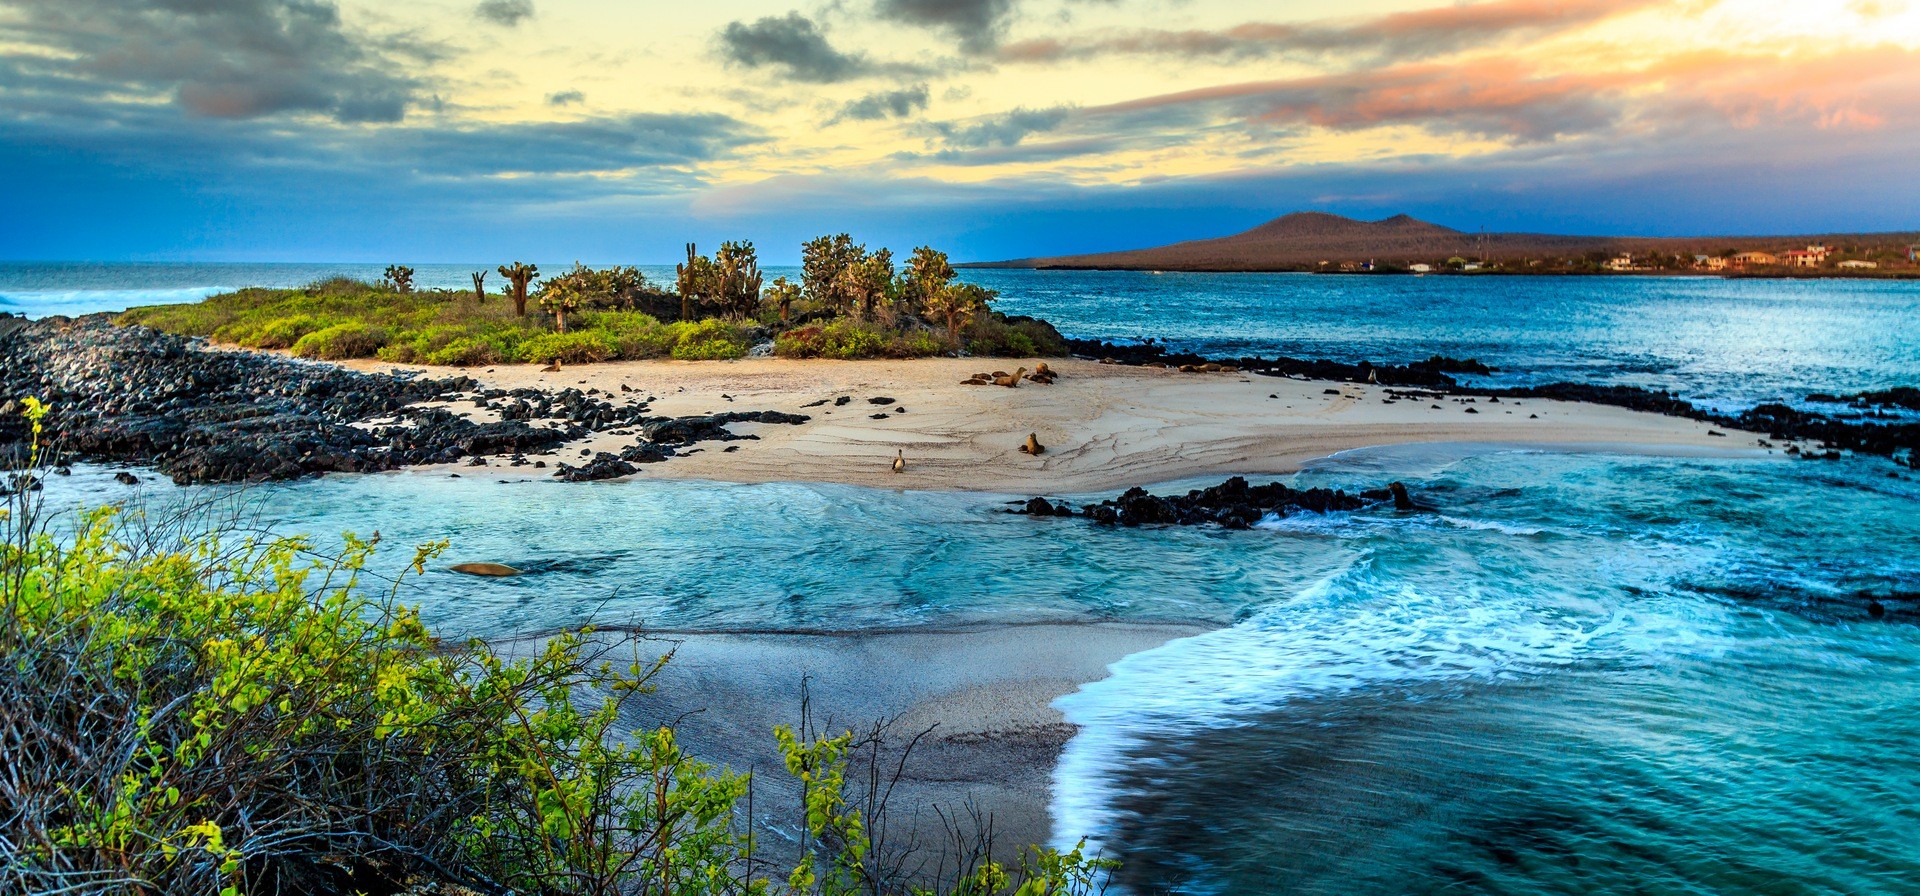 Galapagos Private Jet Air Charter Flights